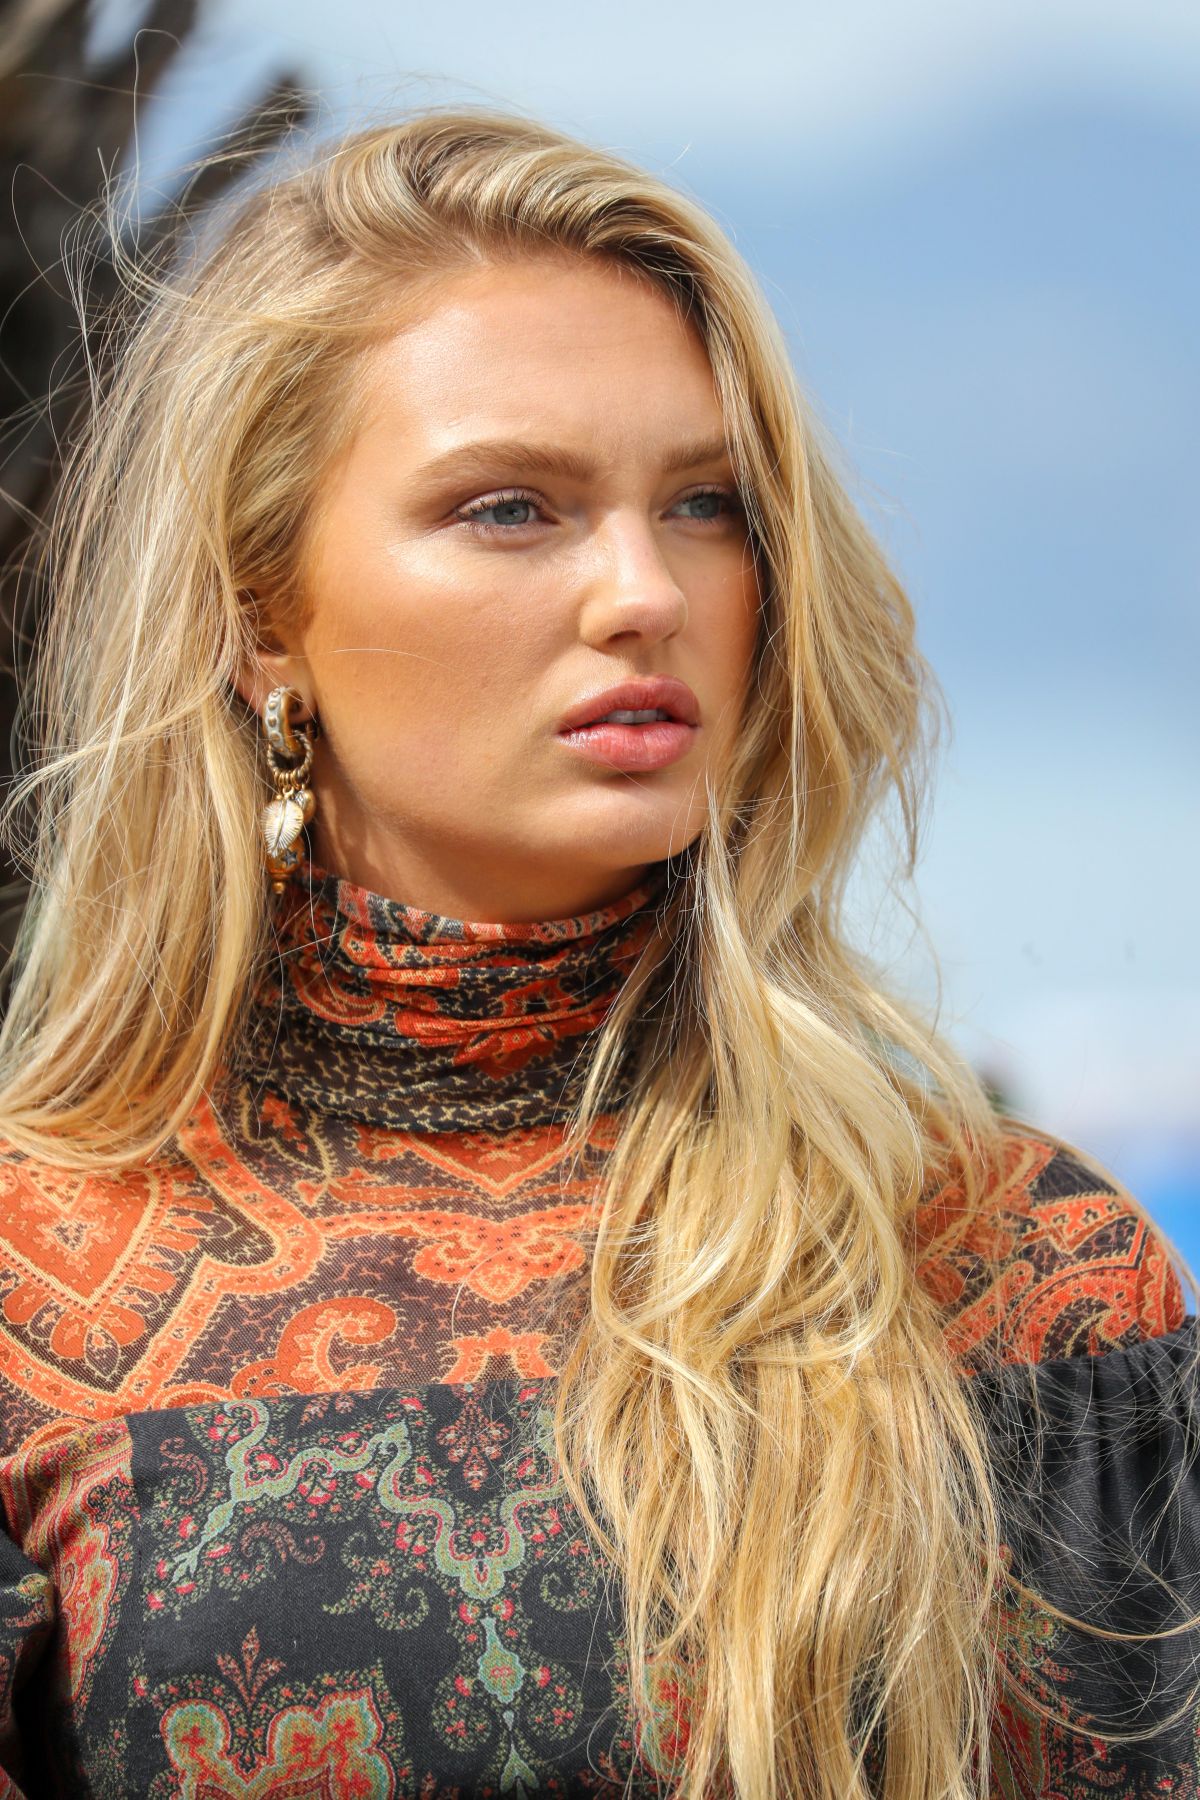 romee-strijd-arrives-at-martinez-hotel-in-cannes-05-15-2019-3.jpg